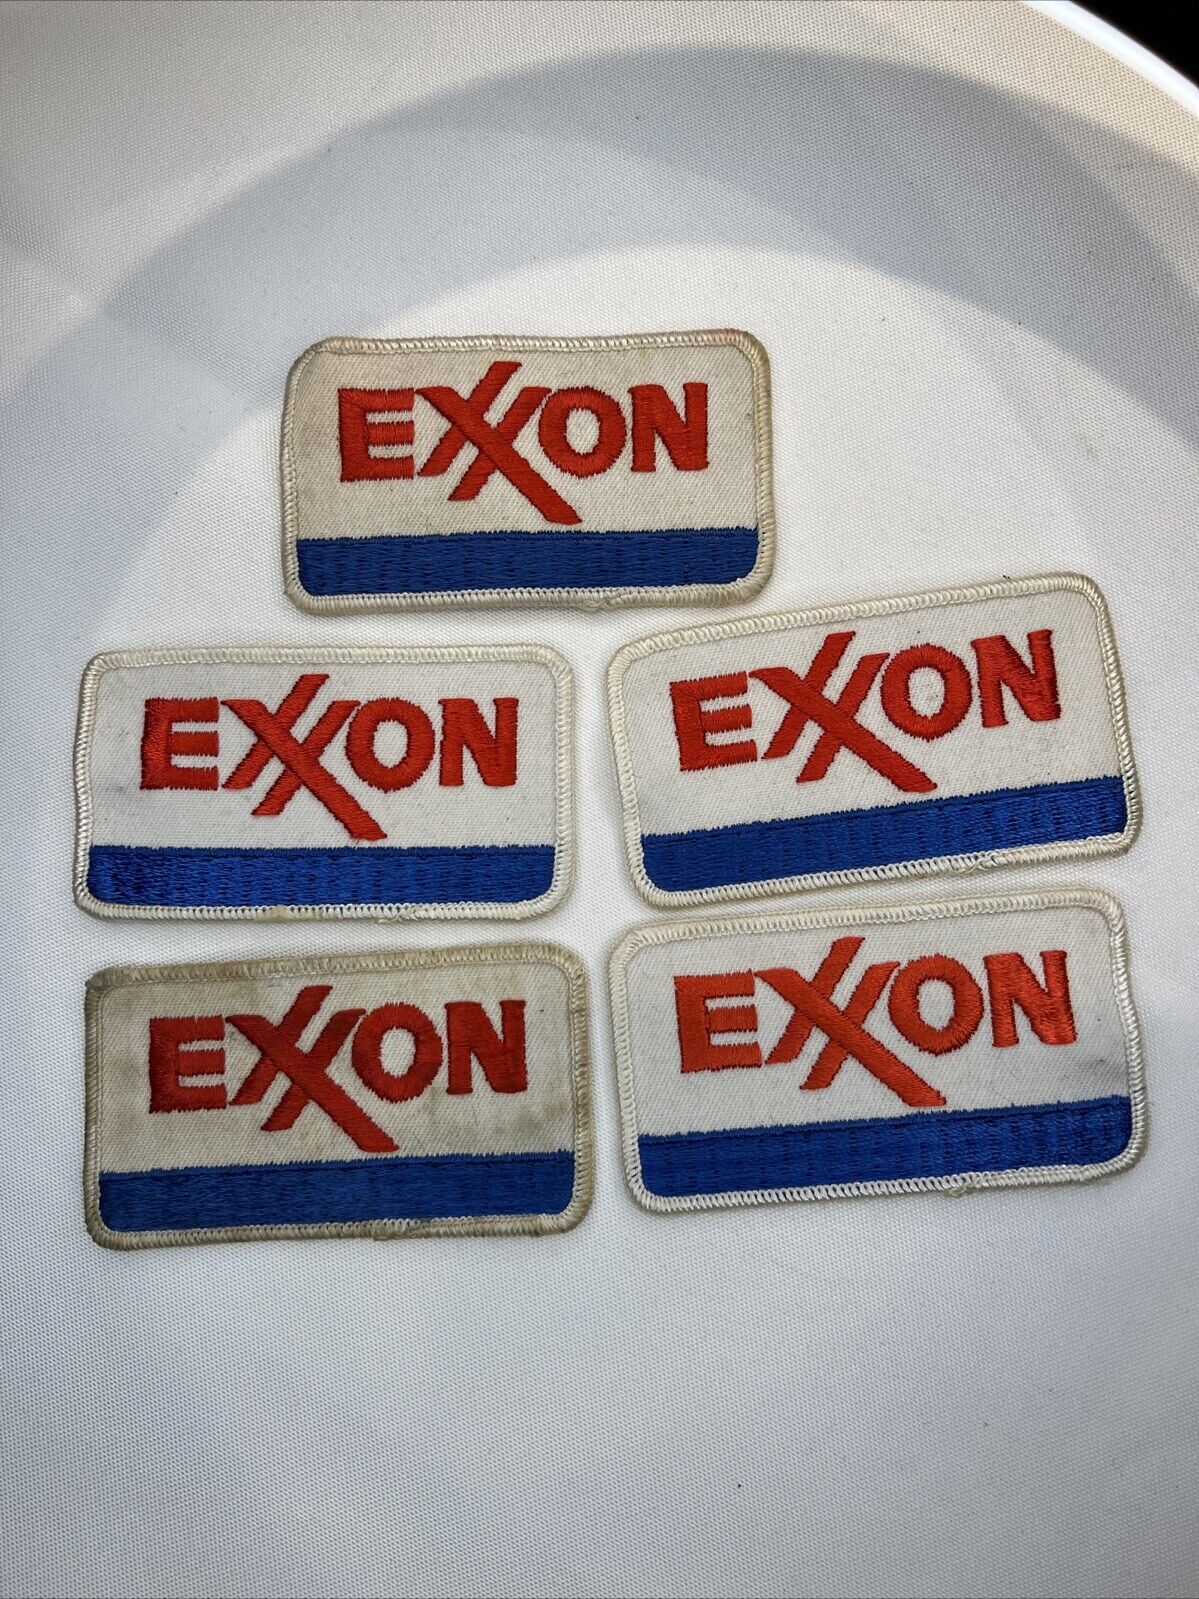 EXXON Embroidered patch Set of 5 Vintage Patches